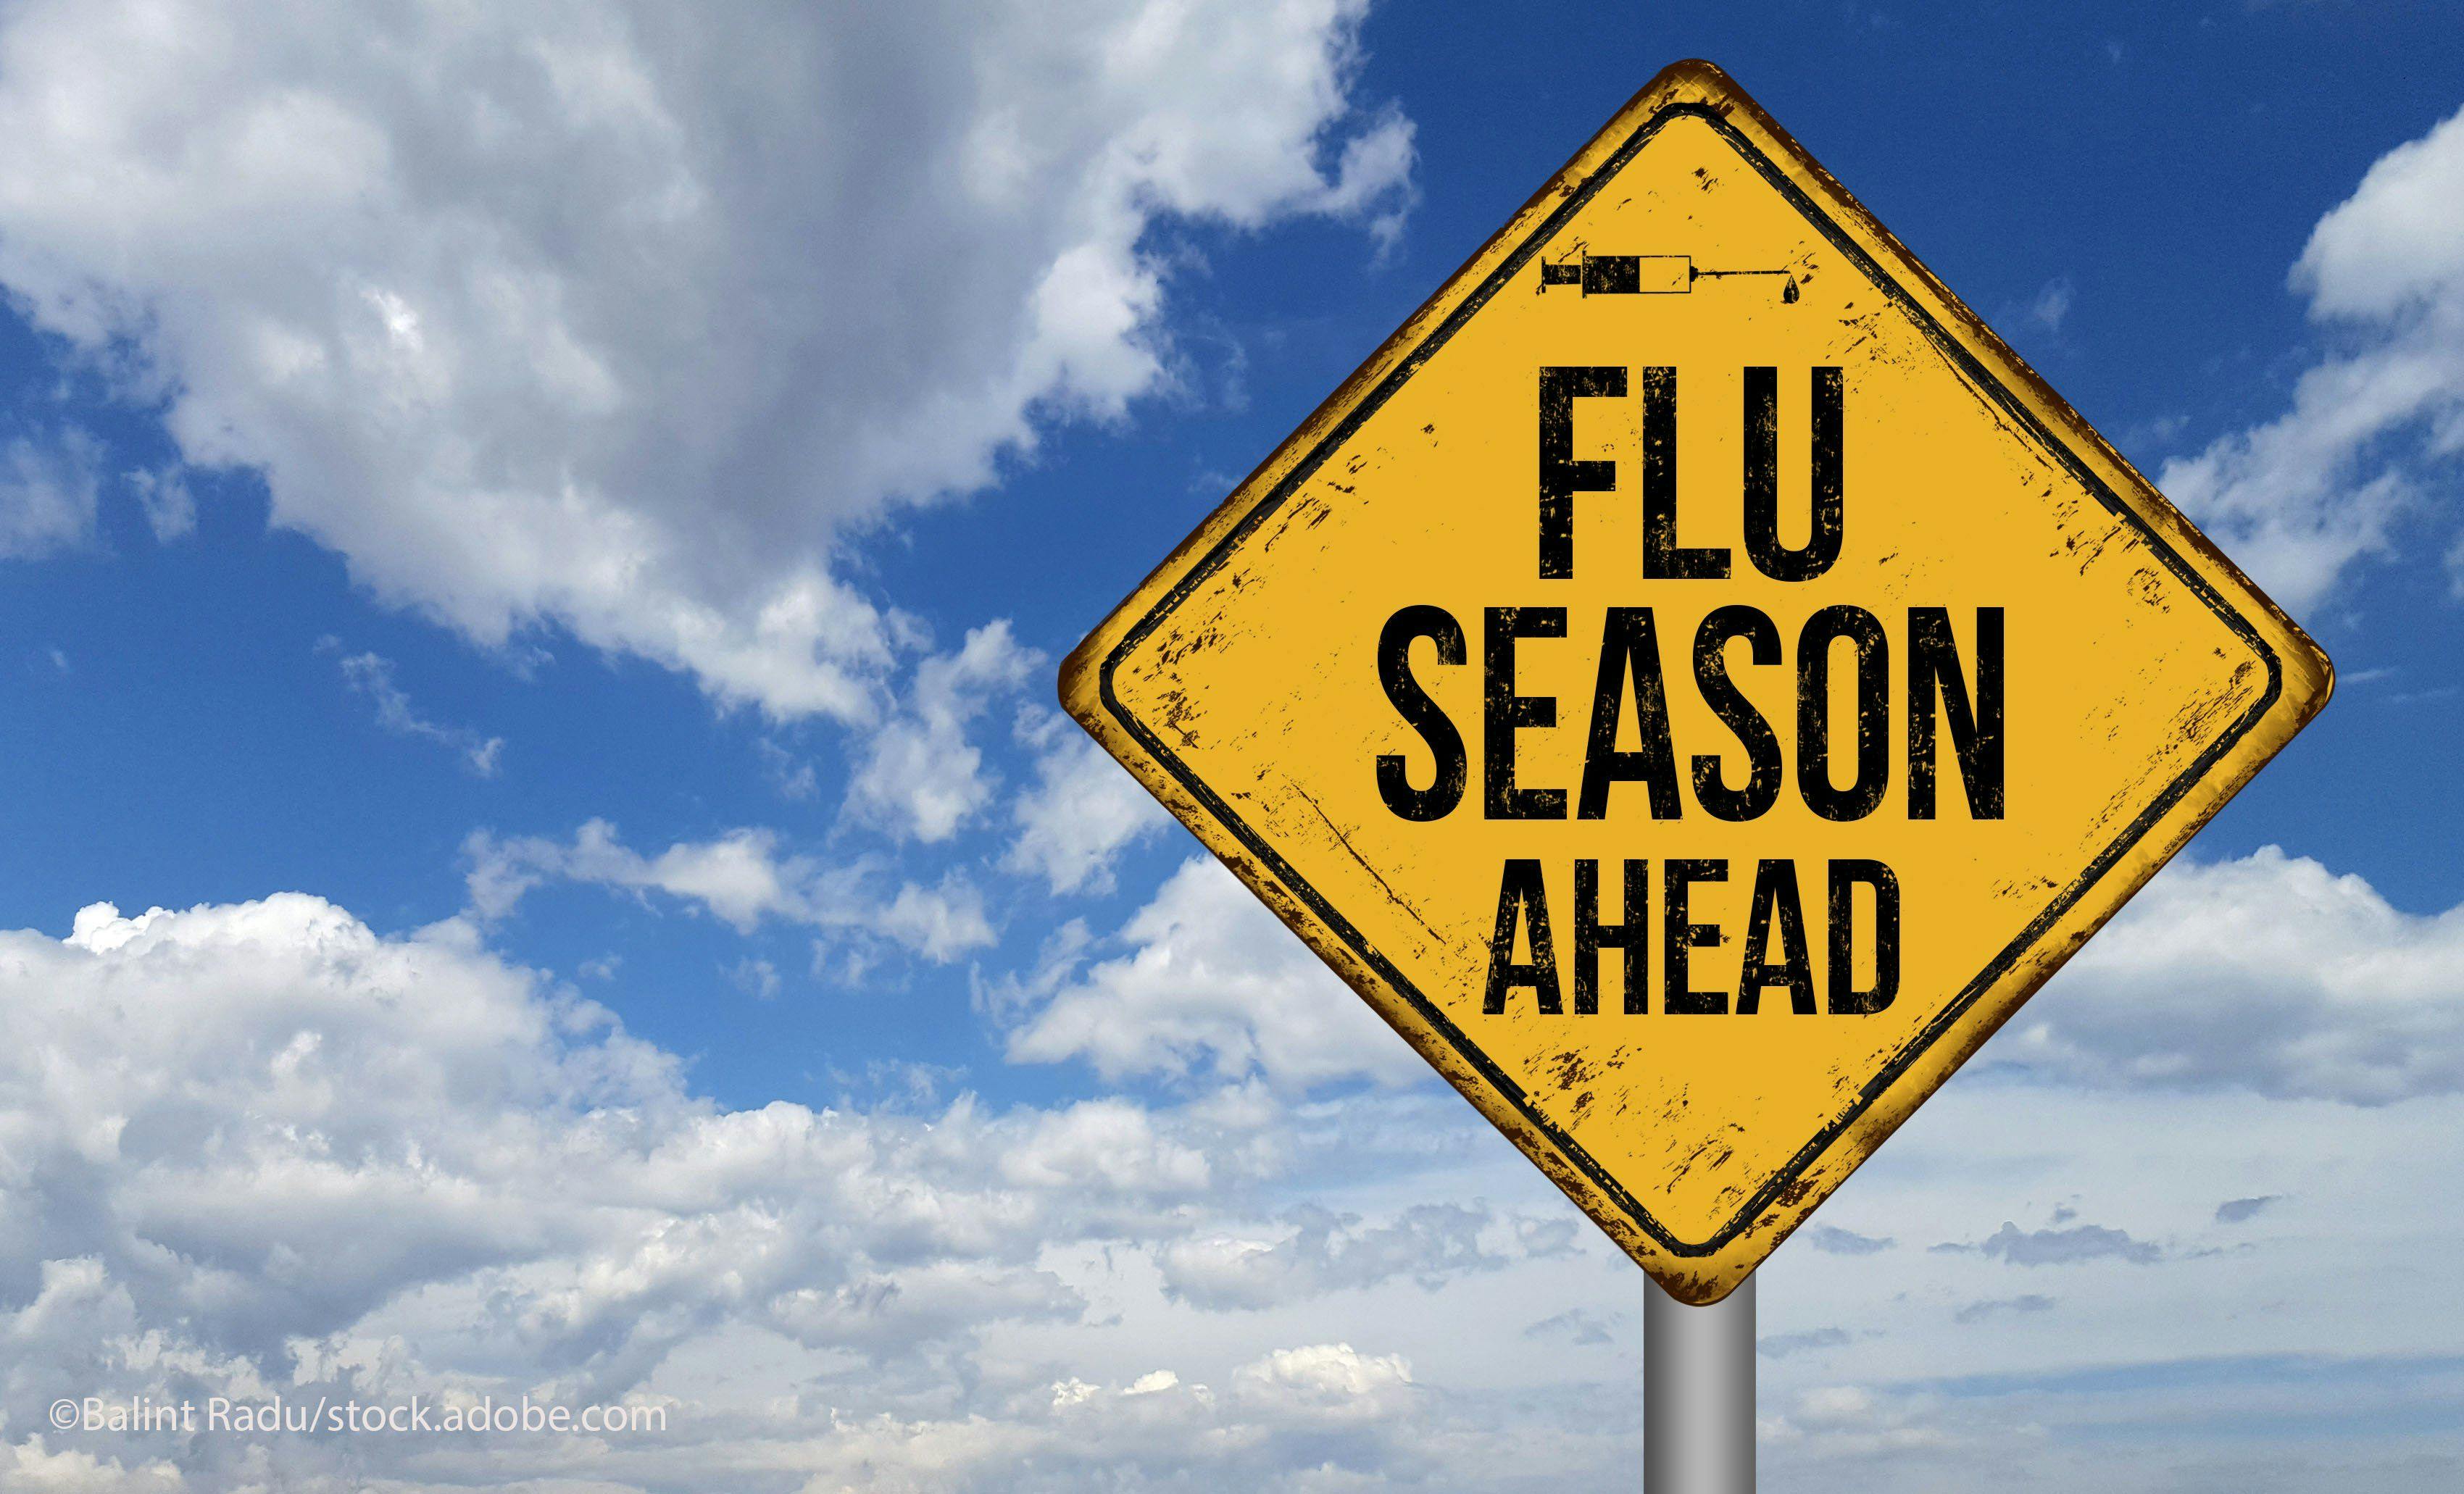 New antiviral approved just in time for flu season